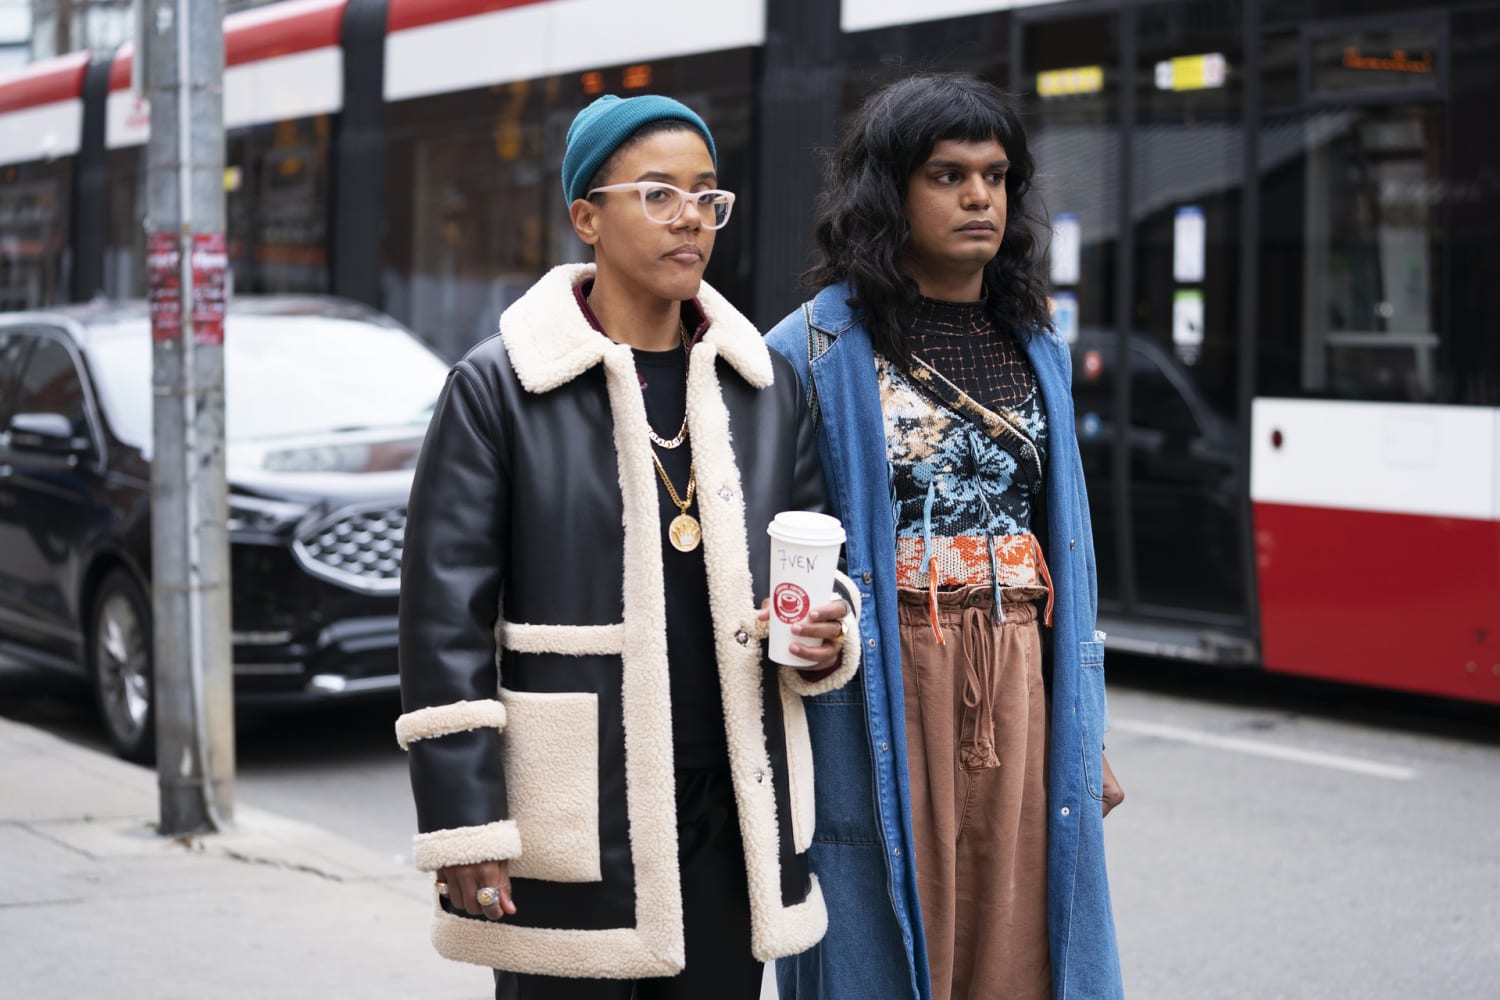 Nonbinary millennial is front and center in HBO Max dramedy Sort